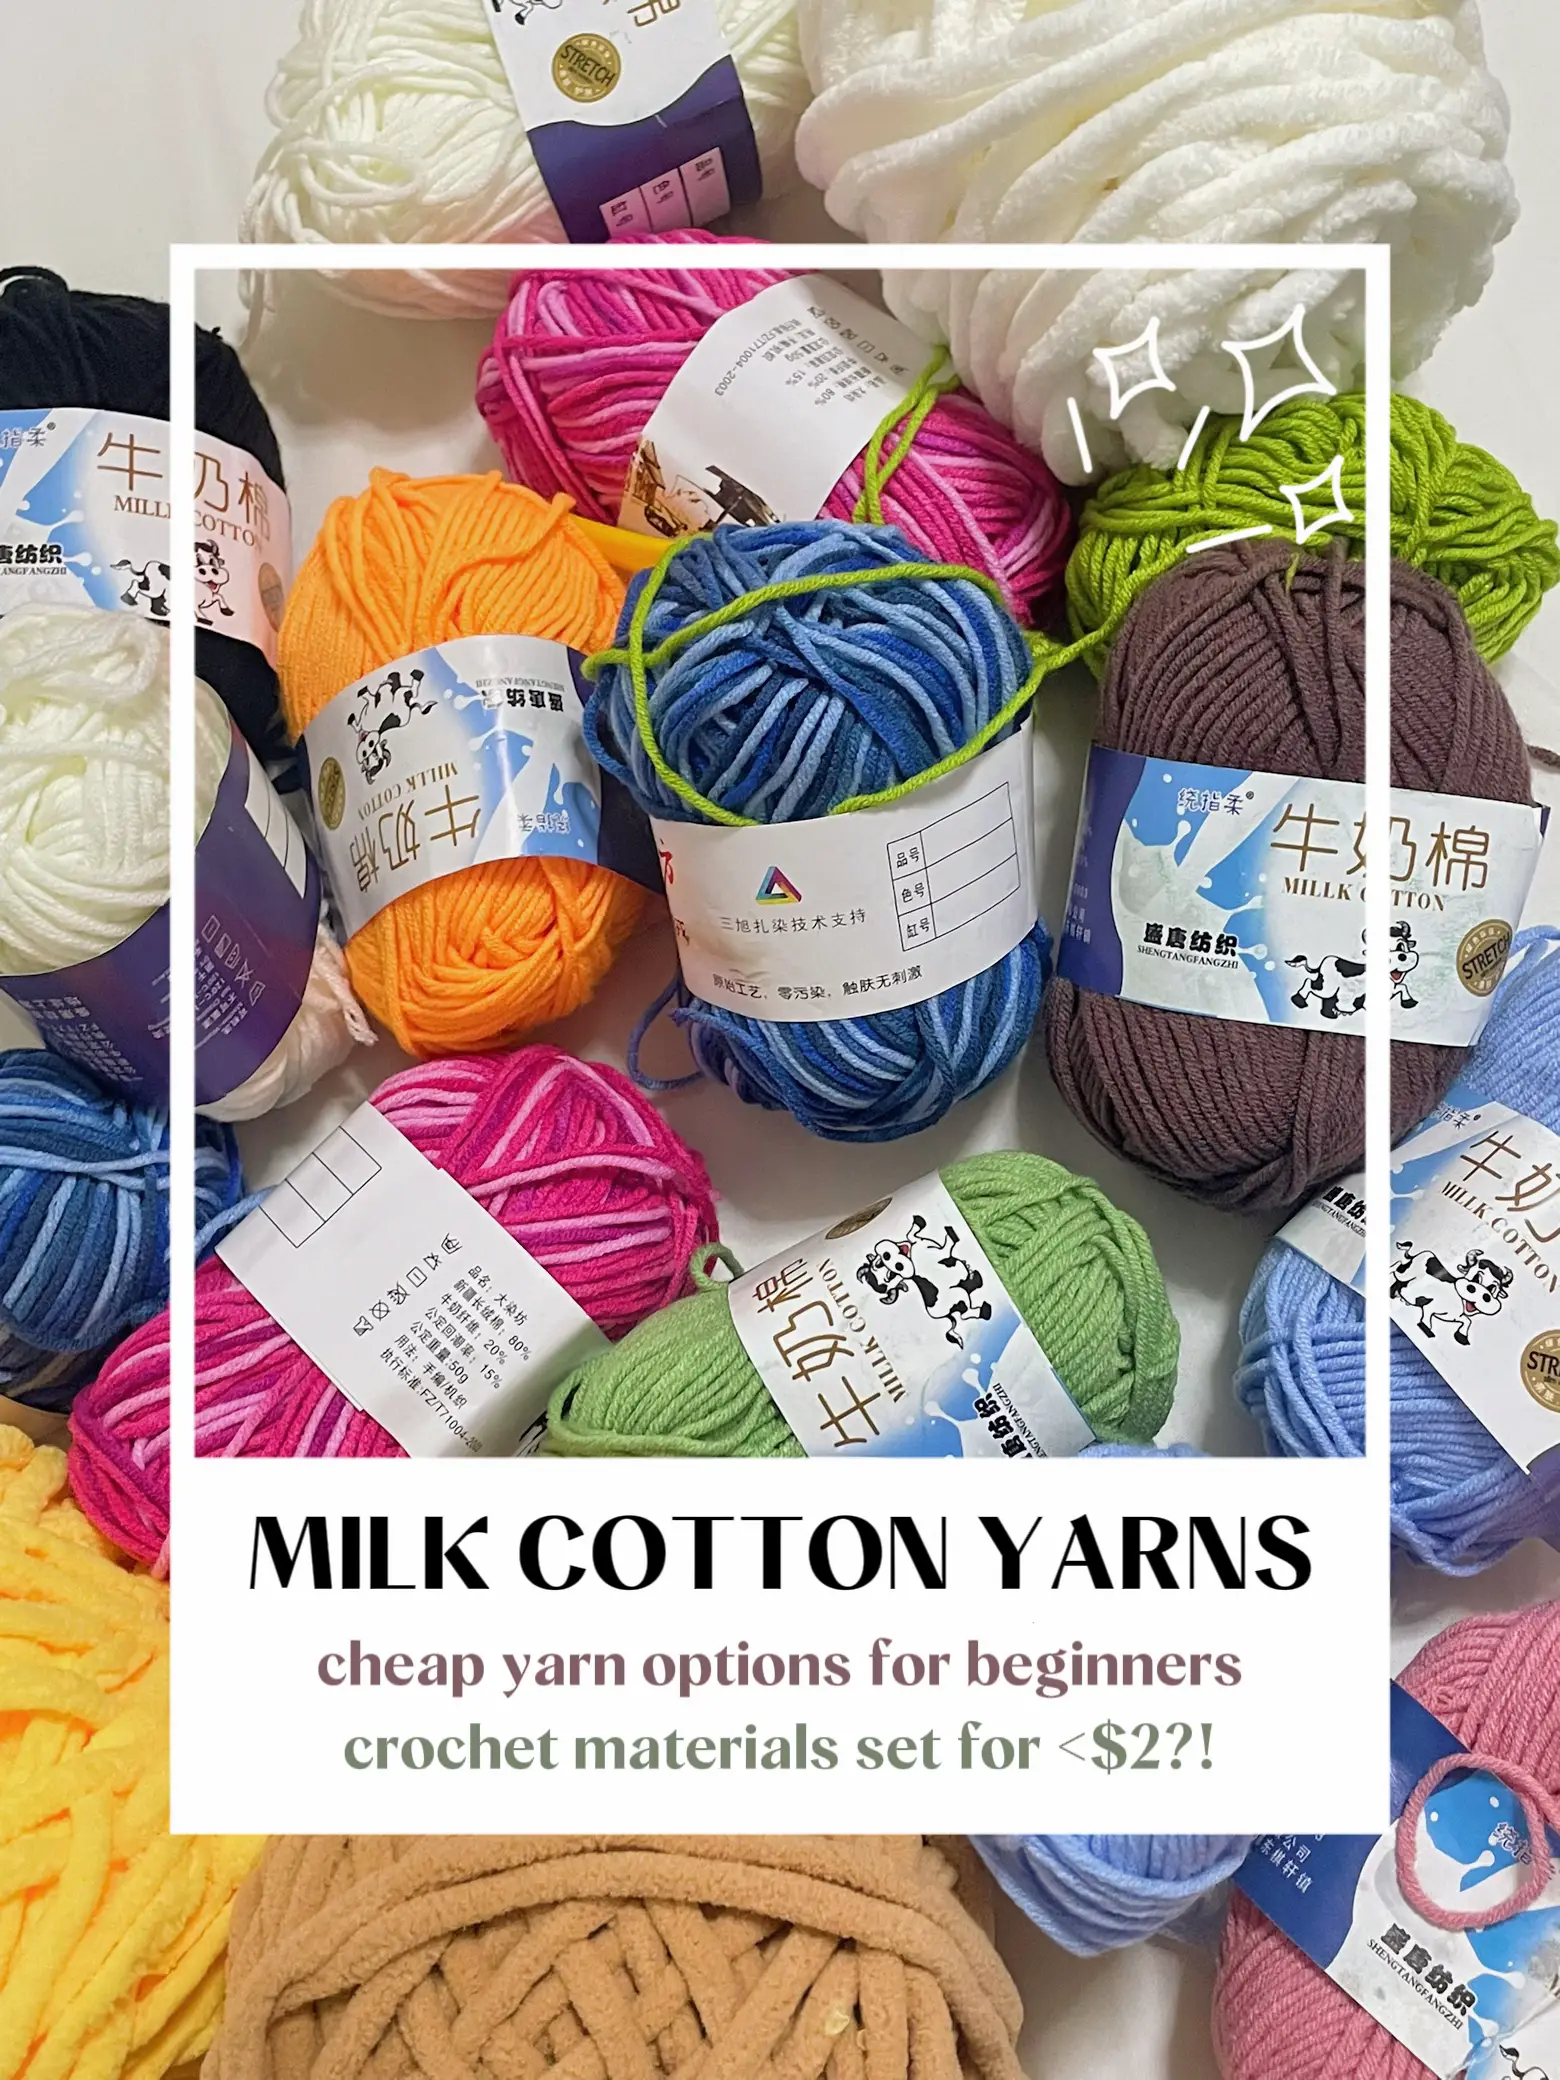 $0.49 YARNS 🤑 & CHEAP crochet supplies!!, Gallery posted by reeux 🍚